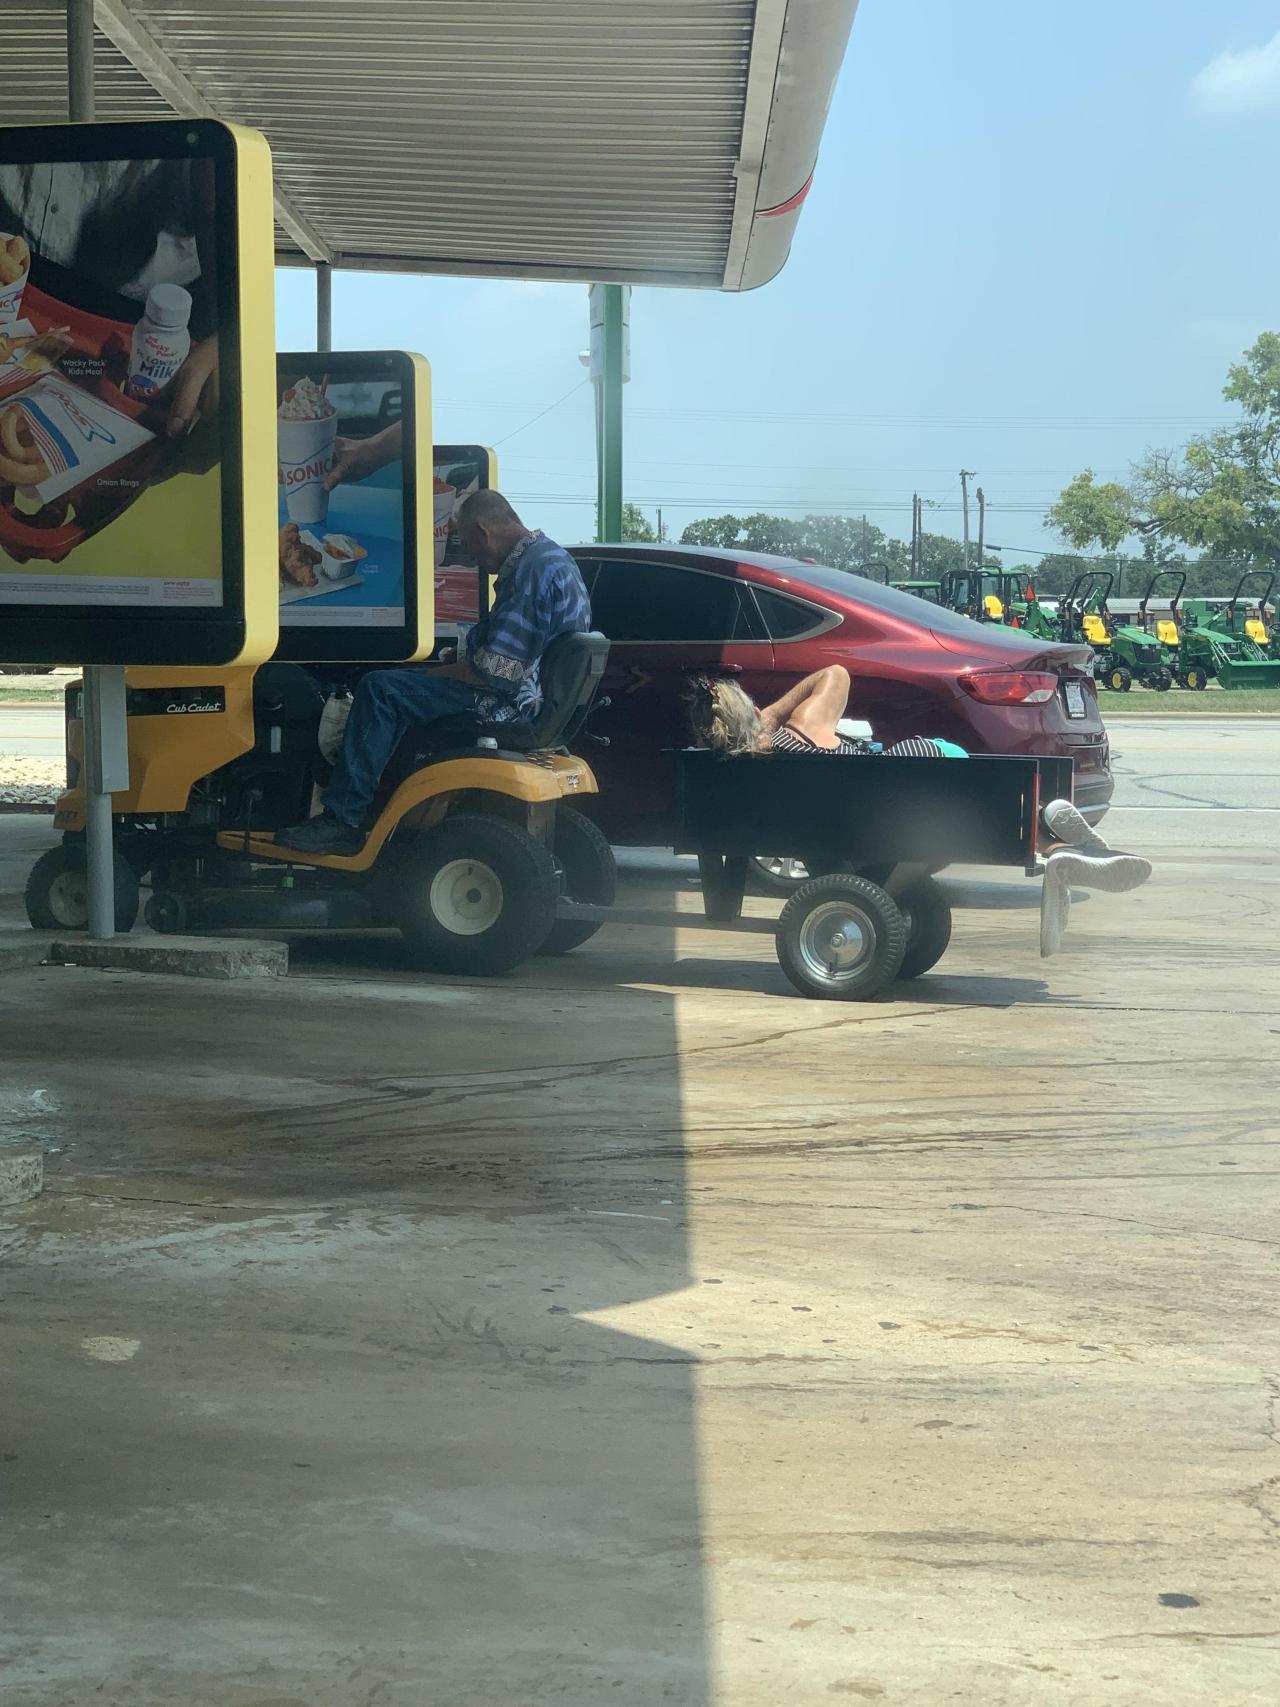 This man towed his wife to sonic on a lawnmower to get a vanilla ice cream cone #This man towed his wife to sonic on a lawnmower to get a vanilla ice cream cone